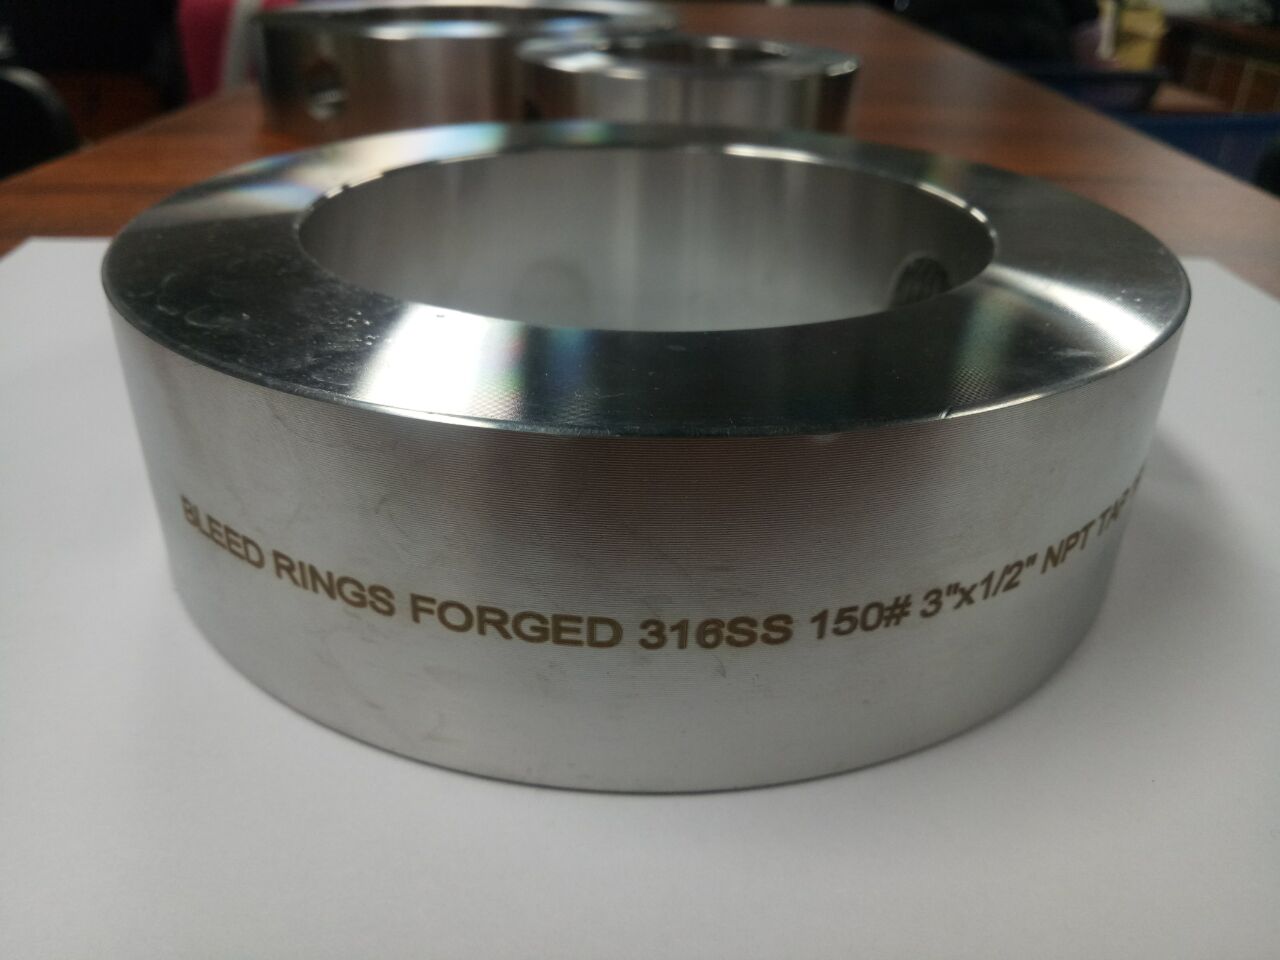 BLEED RINGS FORGED 316SS 2-1/2” NPT TAP 4